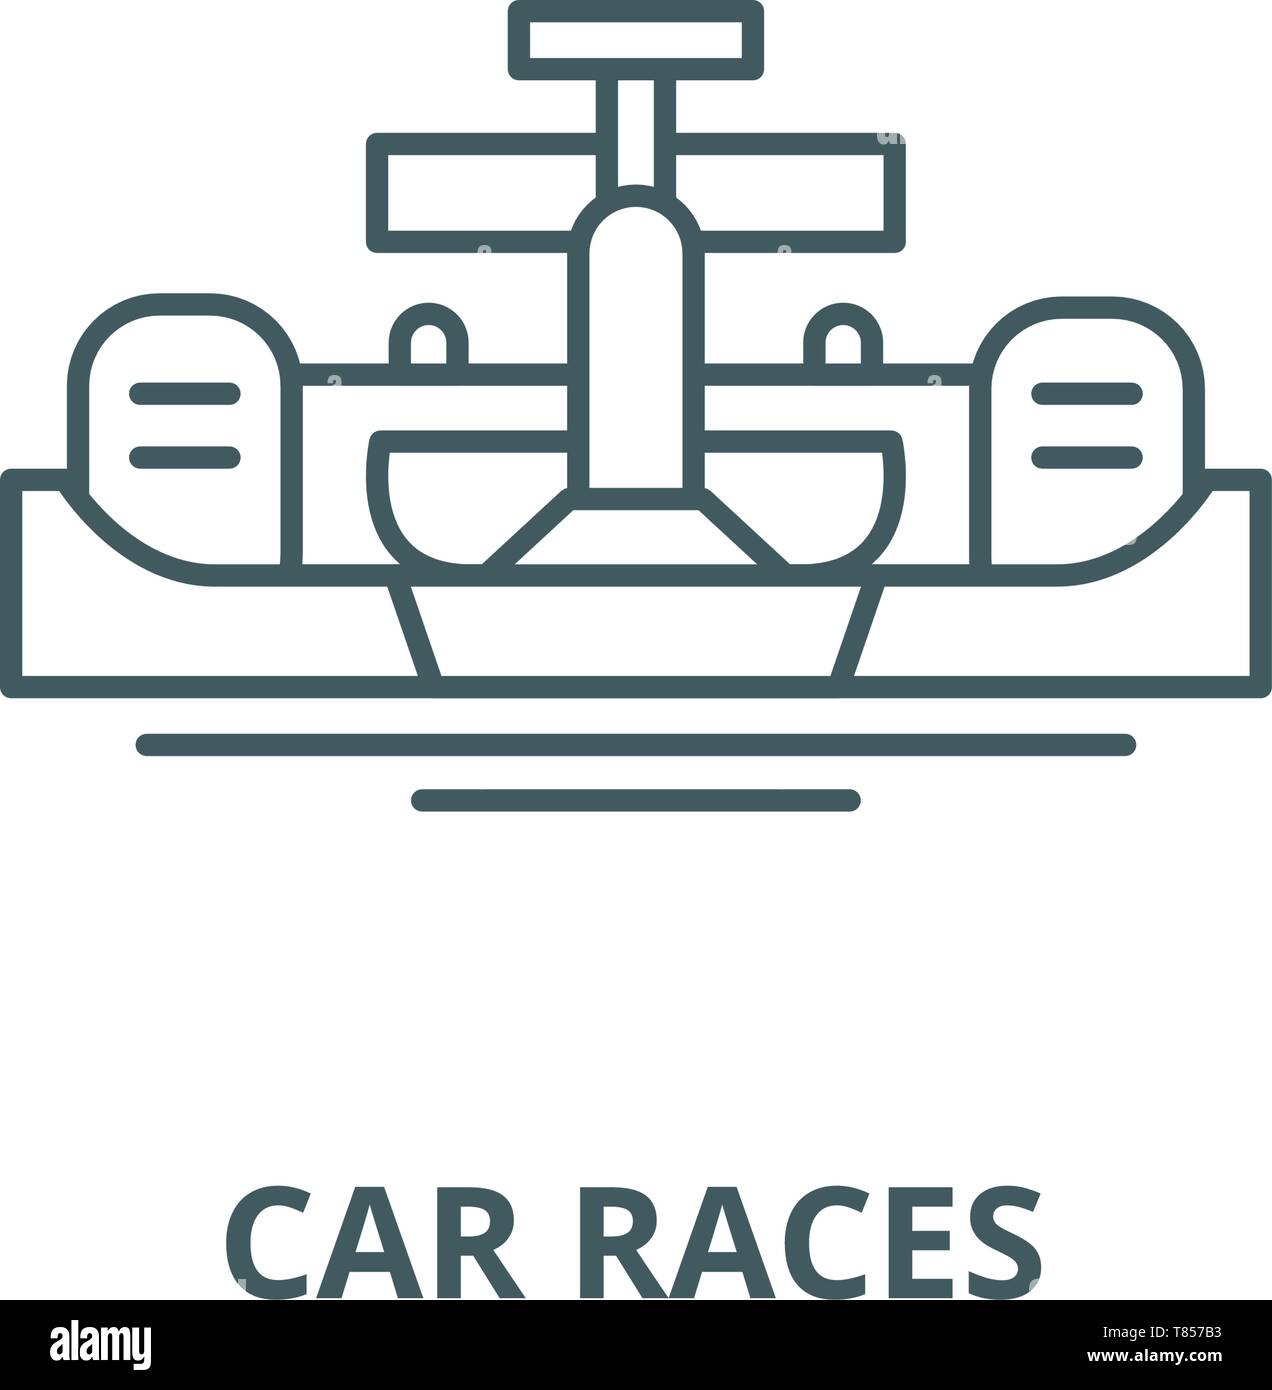 Car races vector line icon, linear concept, outline sign, symbol Stock